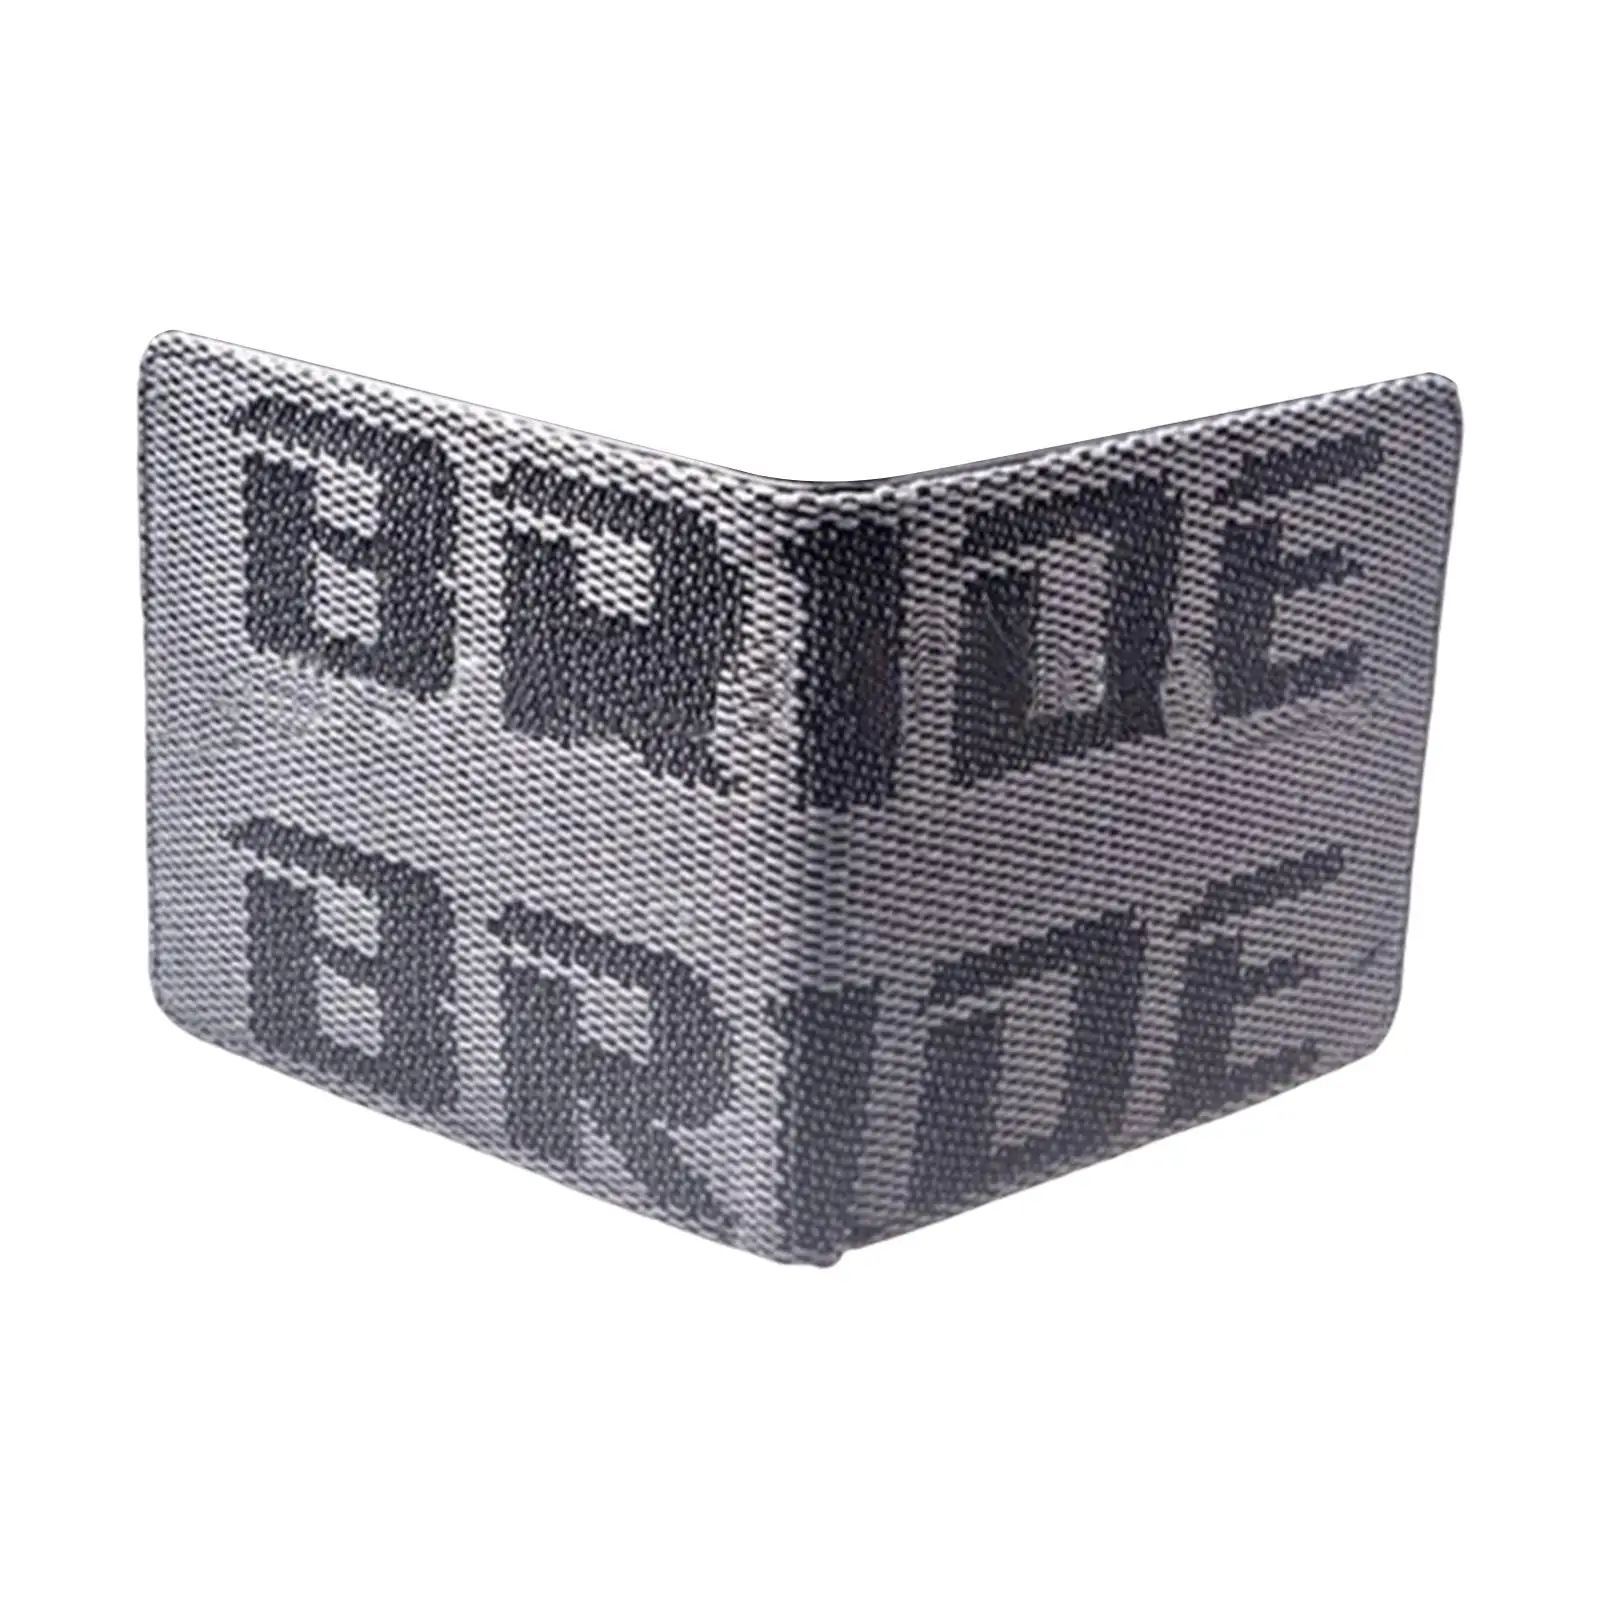 BRIDE Seat Gradation Wallet Custom Stitched Leather Racing Super Cool